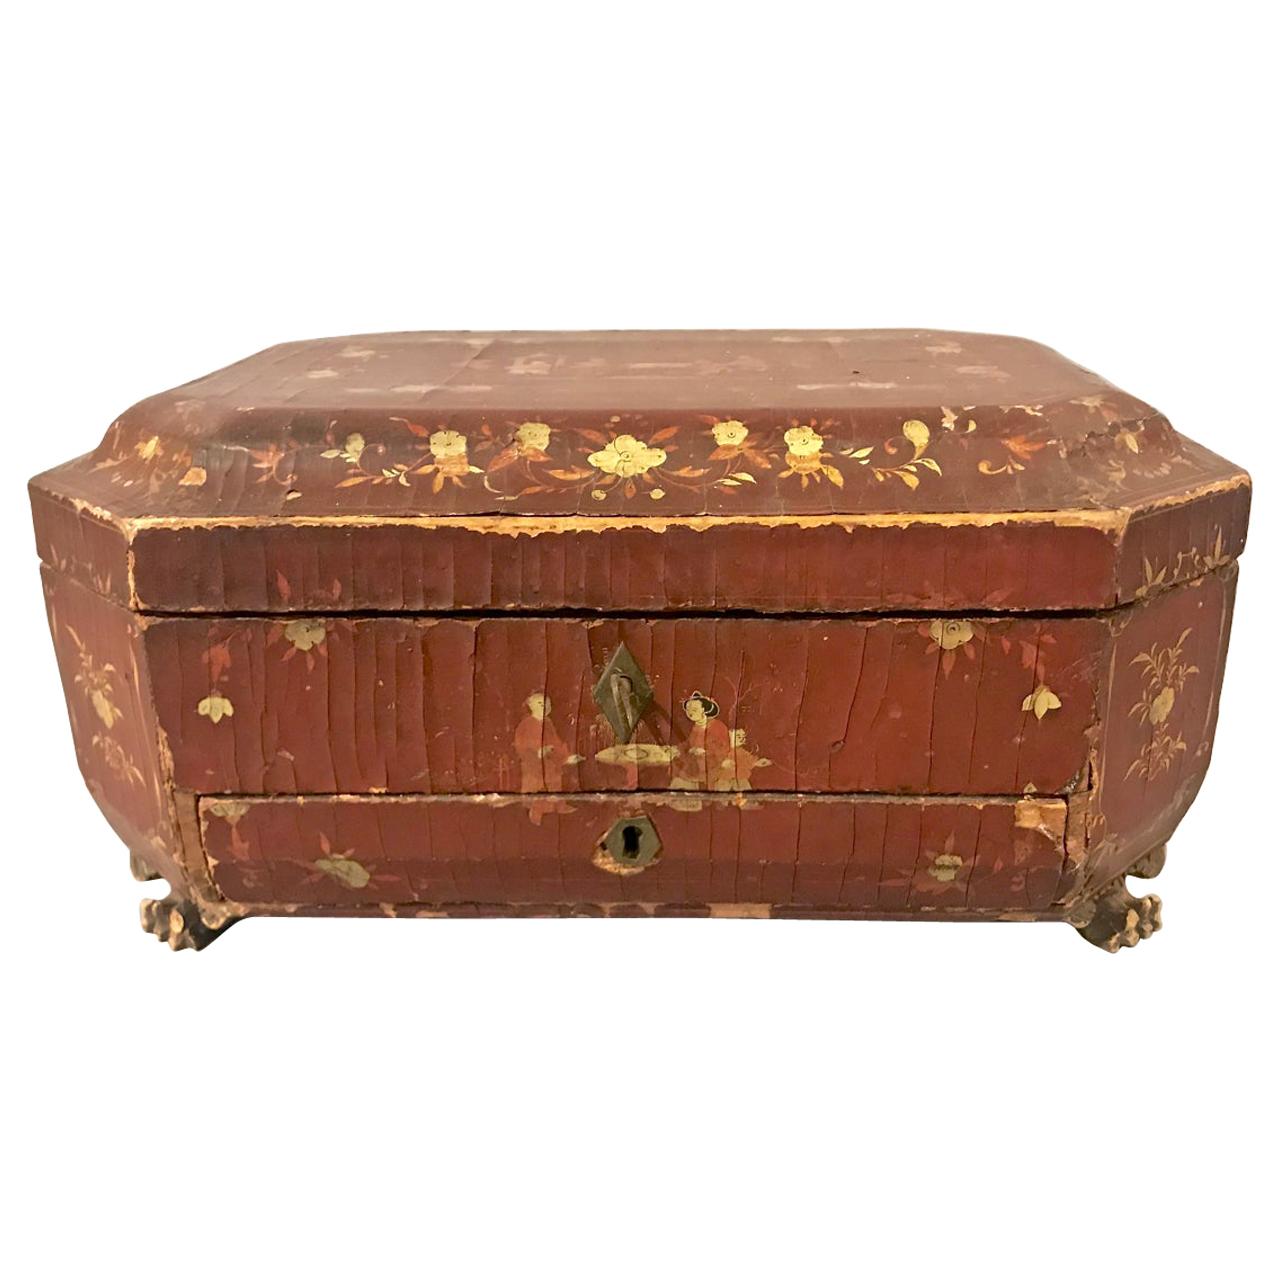 Early 19th Century Chinese Lacquer Box For Sale